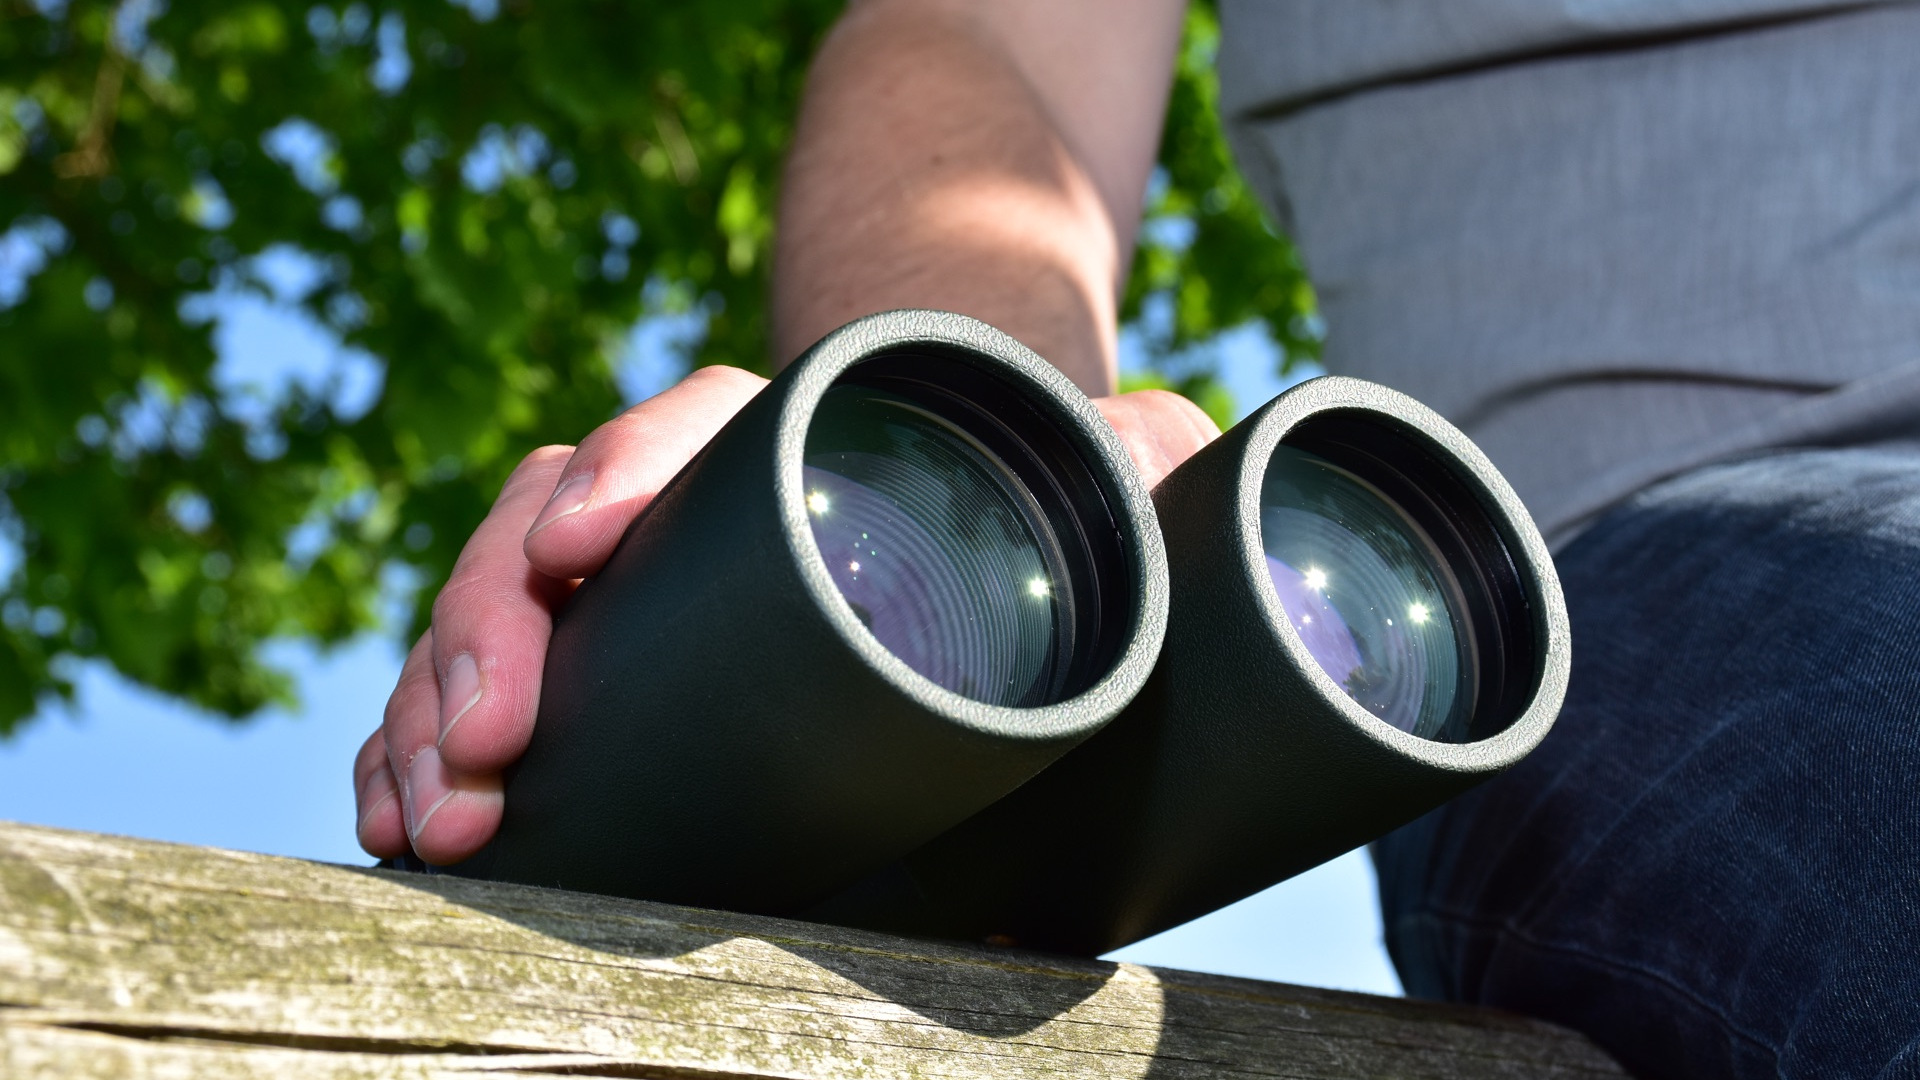 A faithful companion for a night of observation from your favourite location